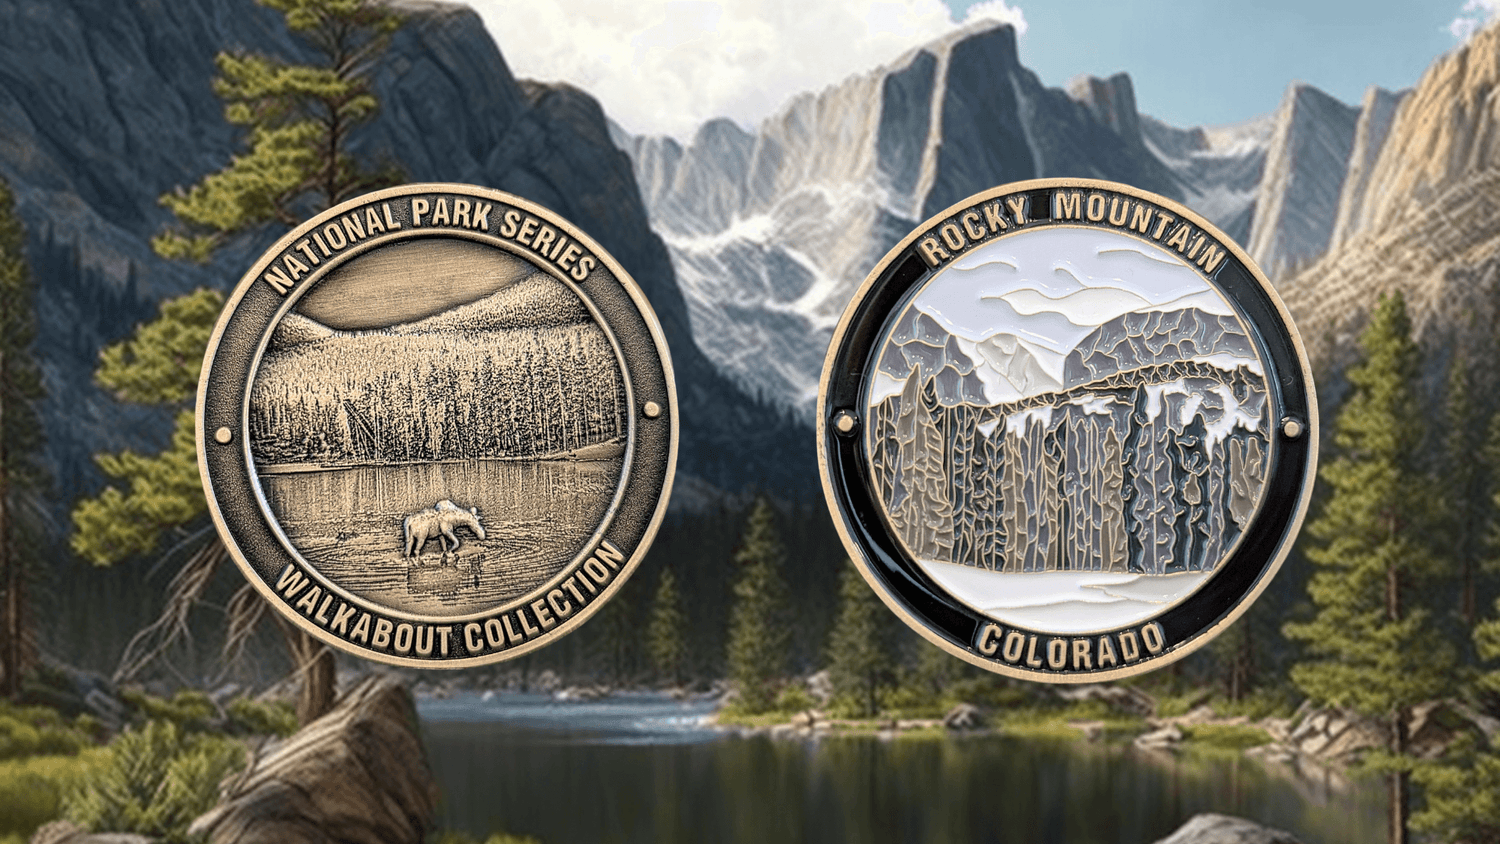 ROCKY MOUNTAIN NATIONAL PARK CHALLENGE COIN